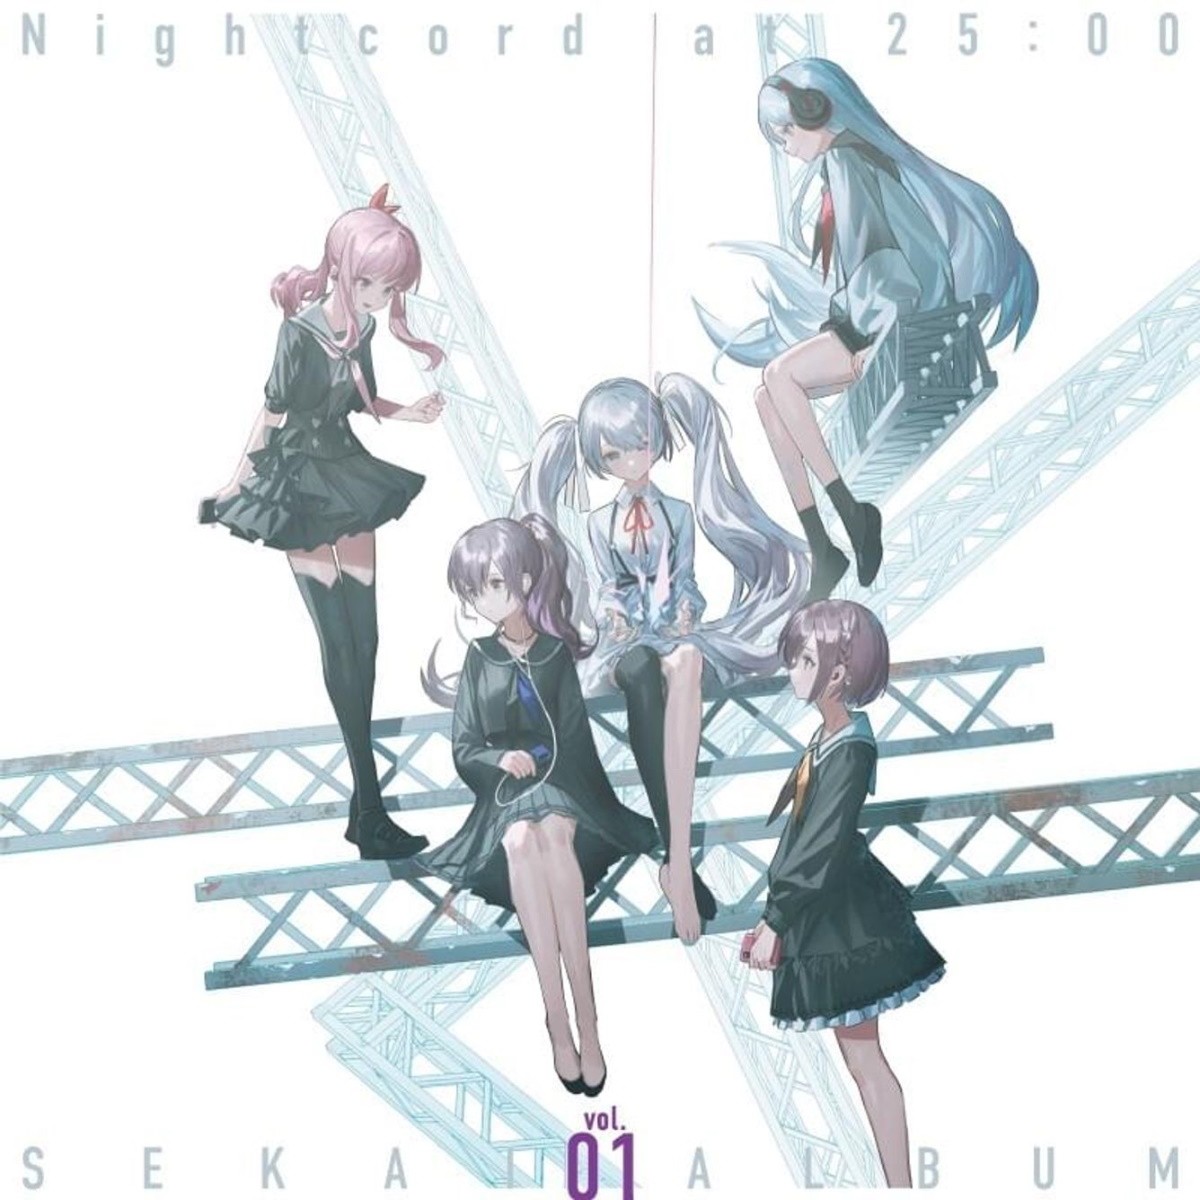 Cover for『Nightcord at 25:00 - Charles』from the release『Nightcord at 25:00 SEKAI ALBUM vol.1』